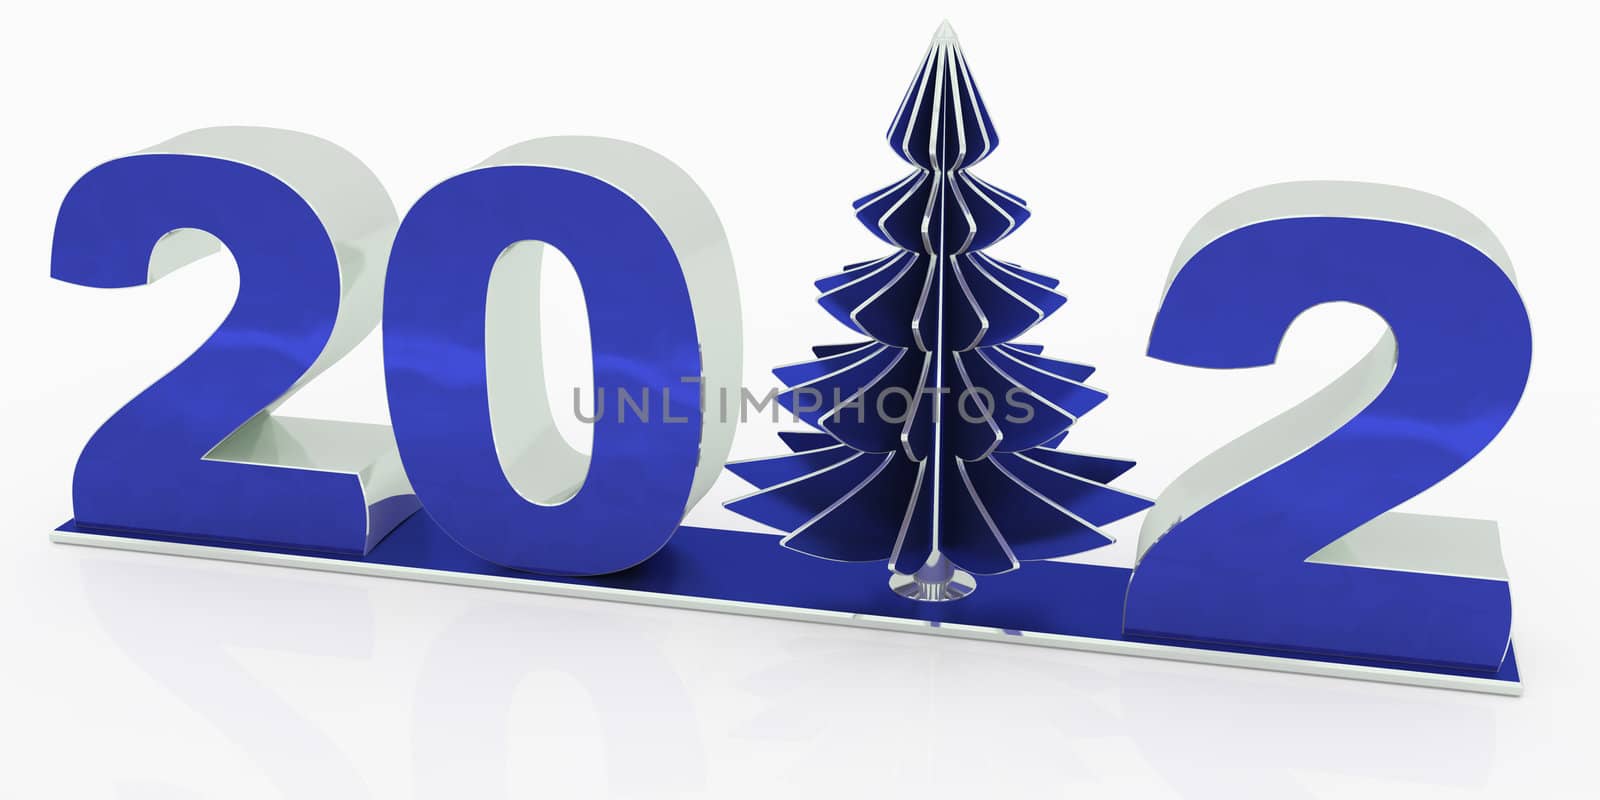 3d numerals "2012" of blue metallic and silver on pedestal. Numeral "1" replaced with christmas tree.